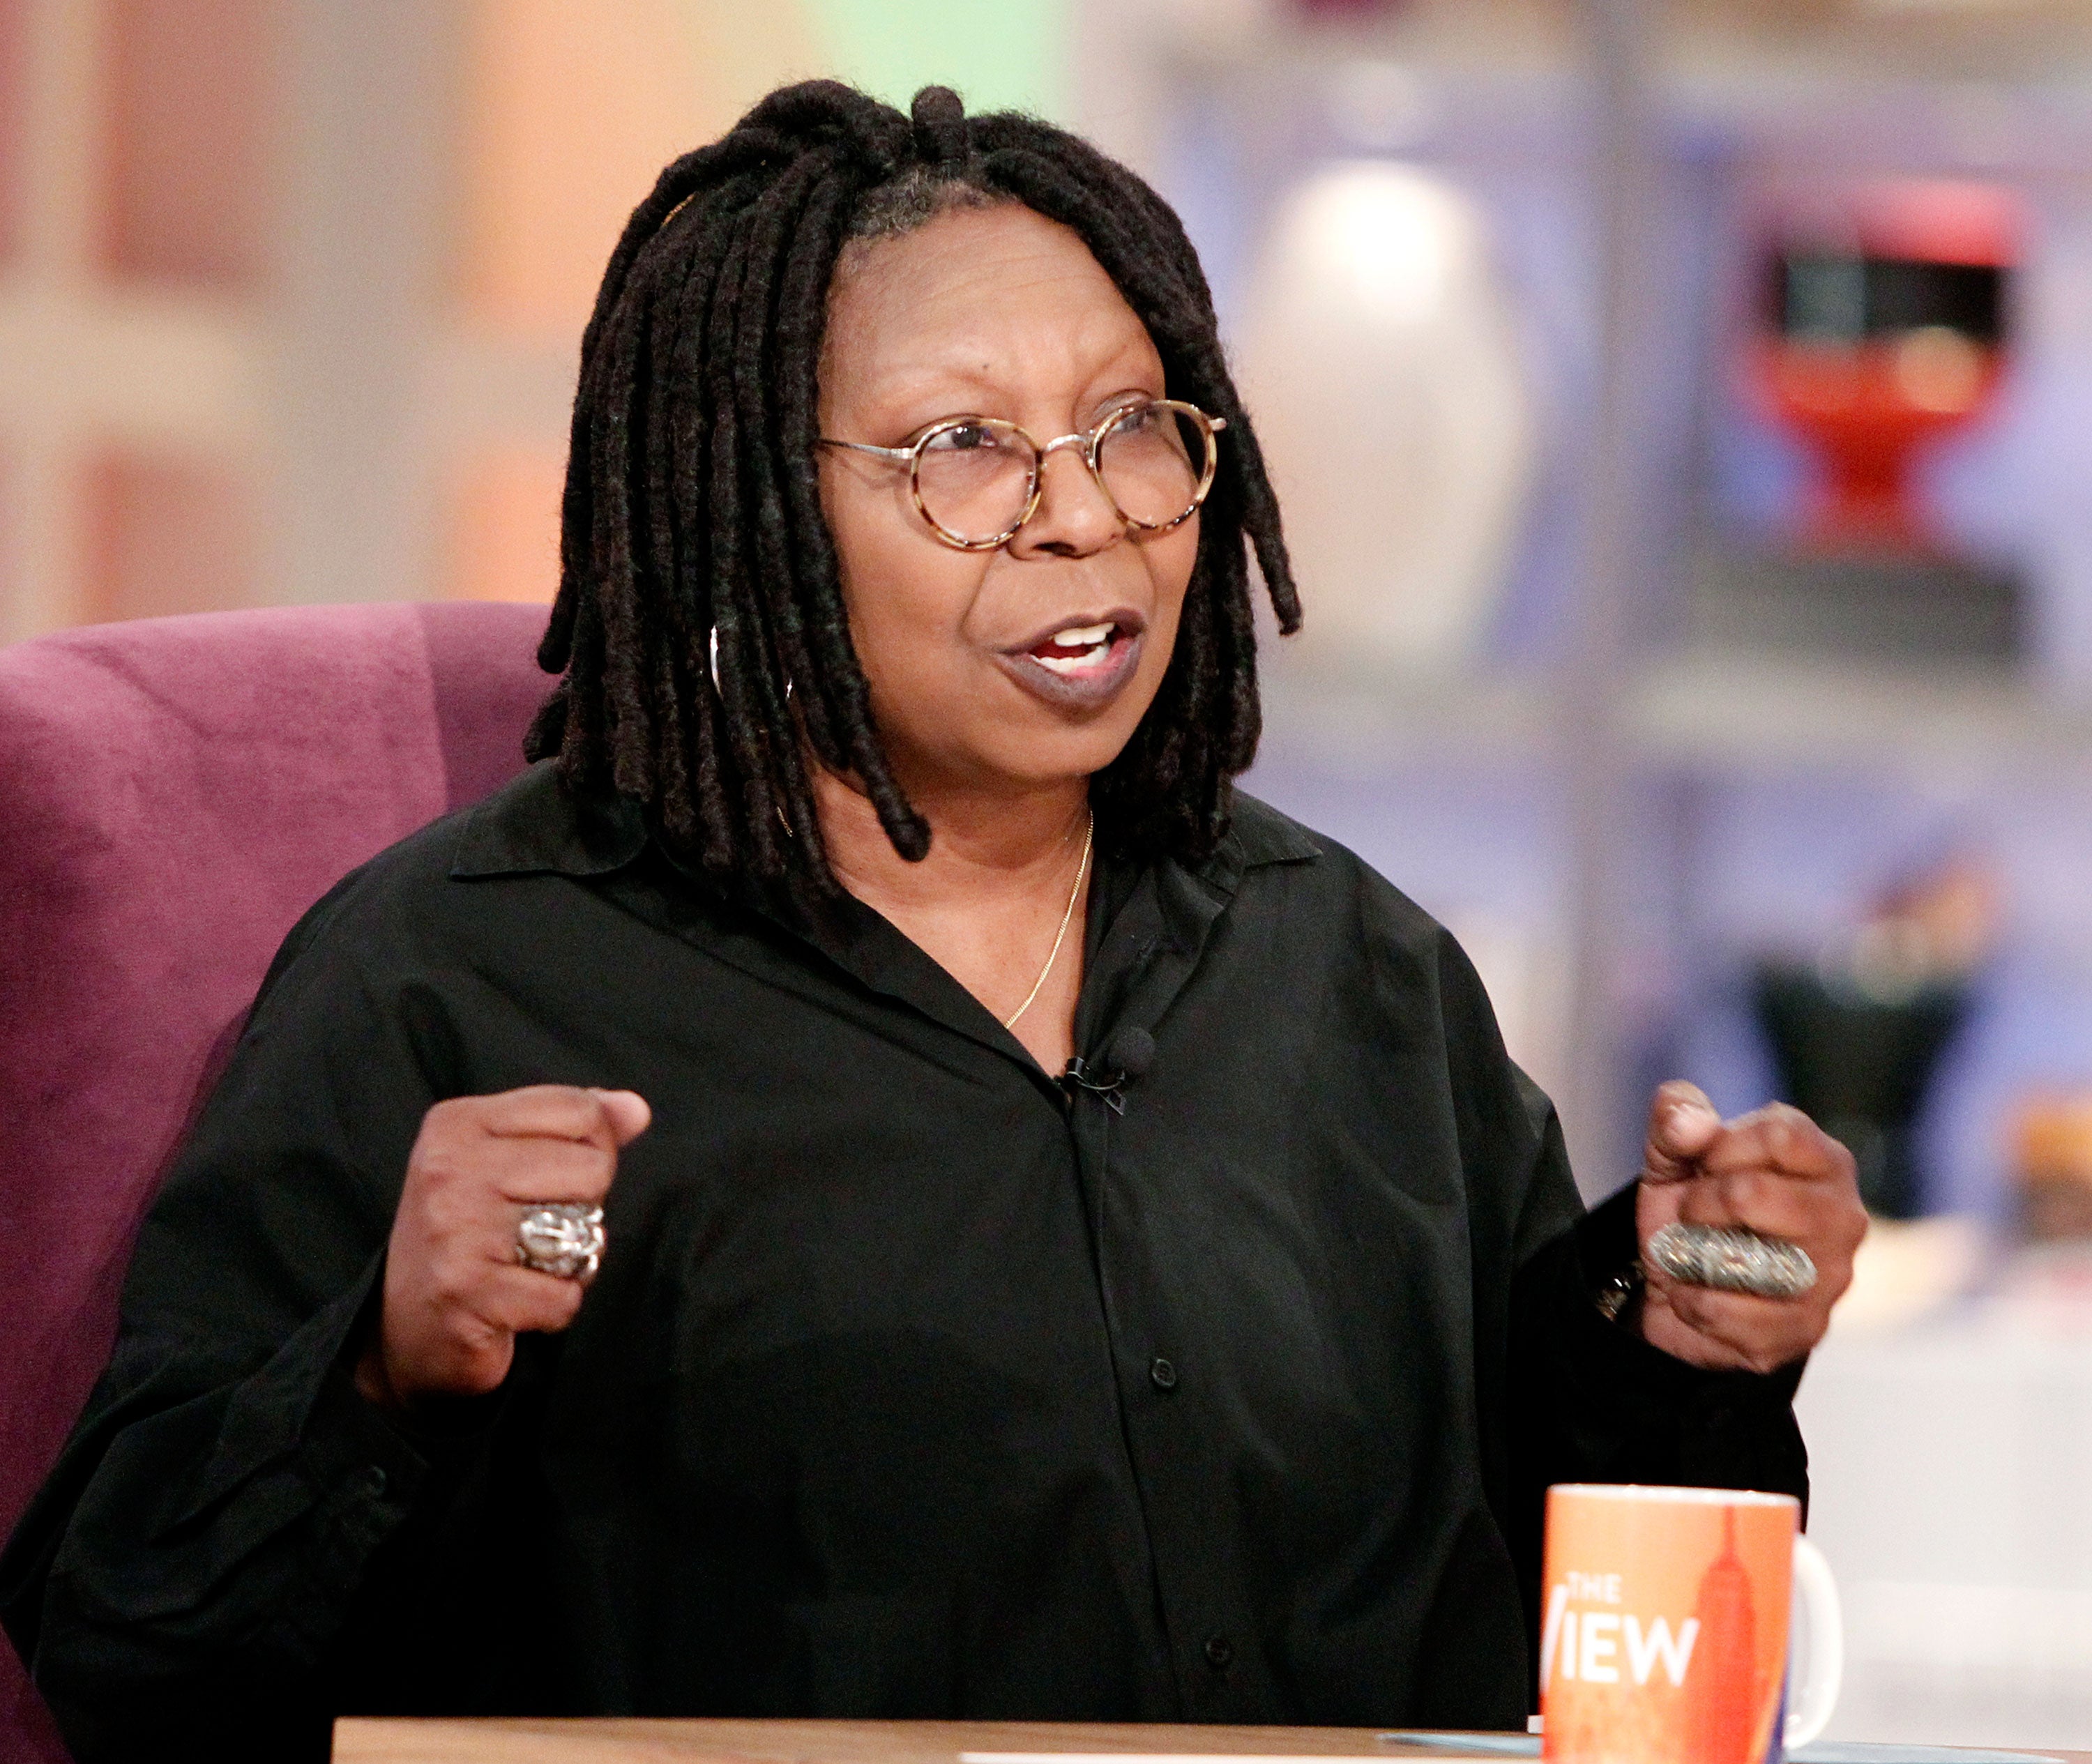 Tuning In? Whoopi Goldberg Is Working On A Racial Drama For Bravo
